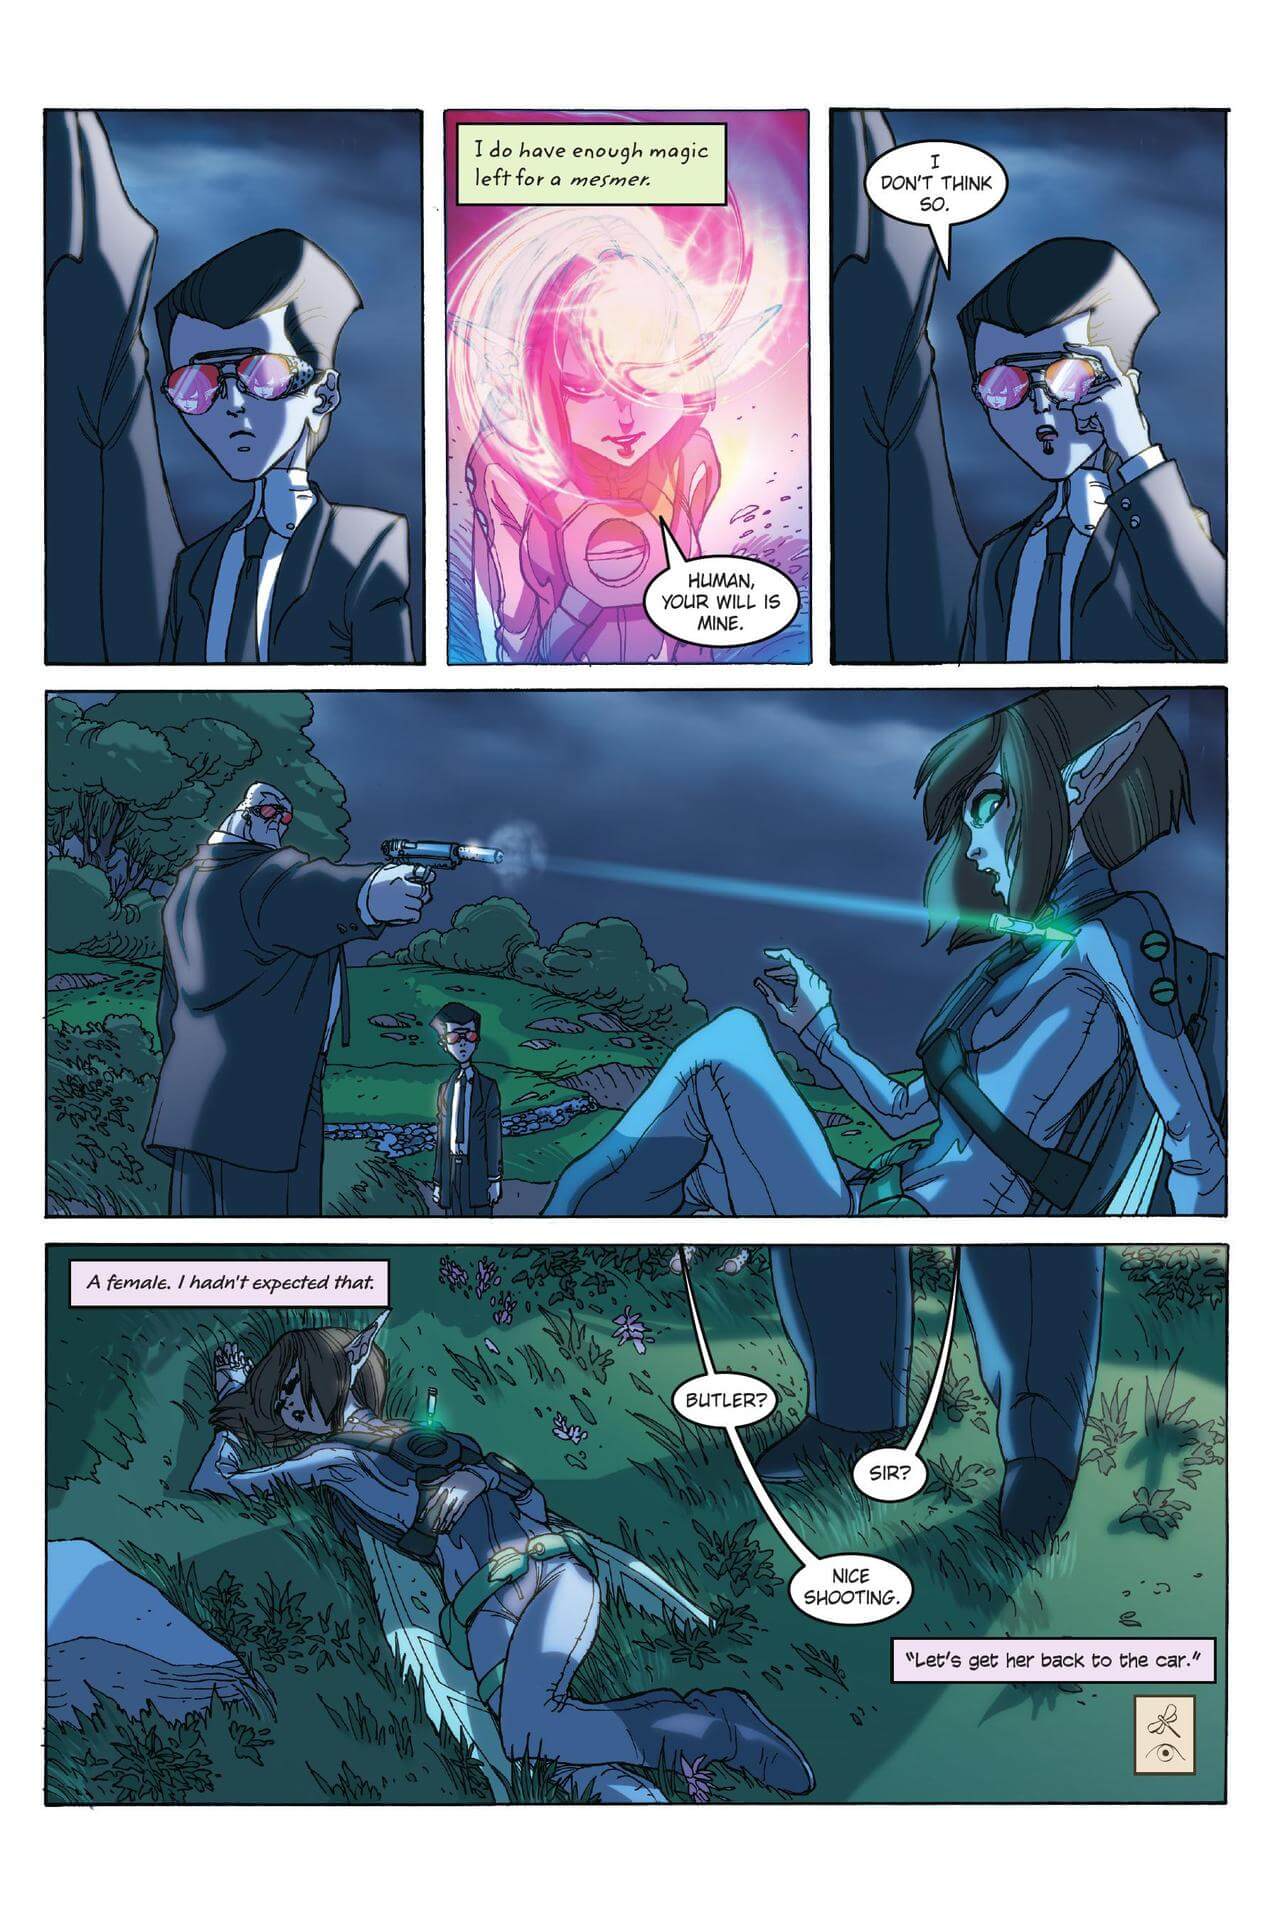 page 34 of artemis fowl the graphic novel